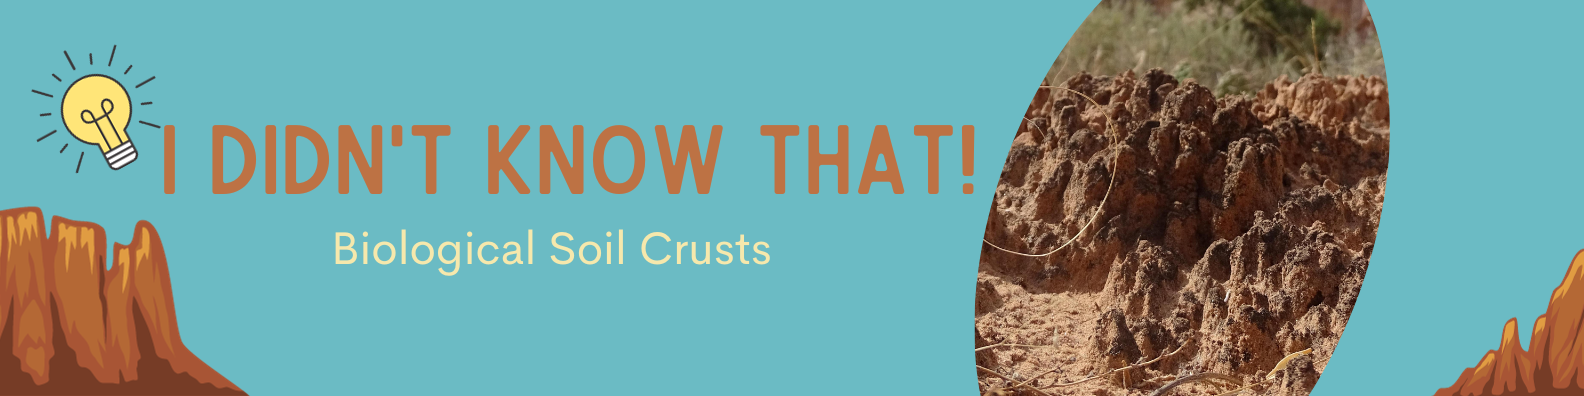 title banner with text "I Didn't Know That! Biological Soil Crusts" and image of a biological soil crust